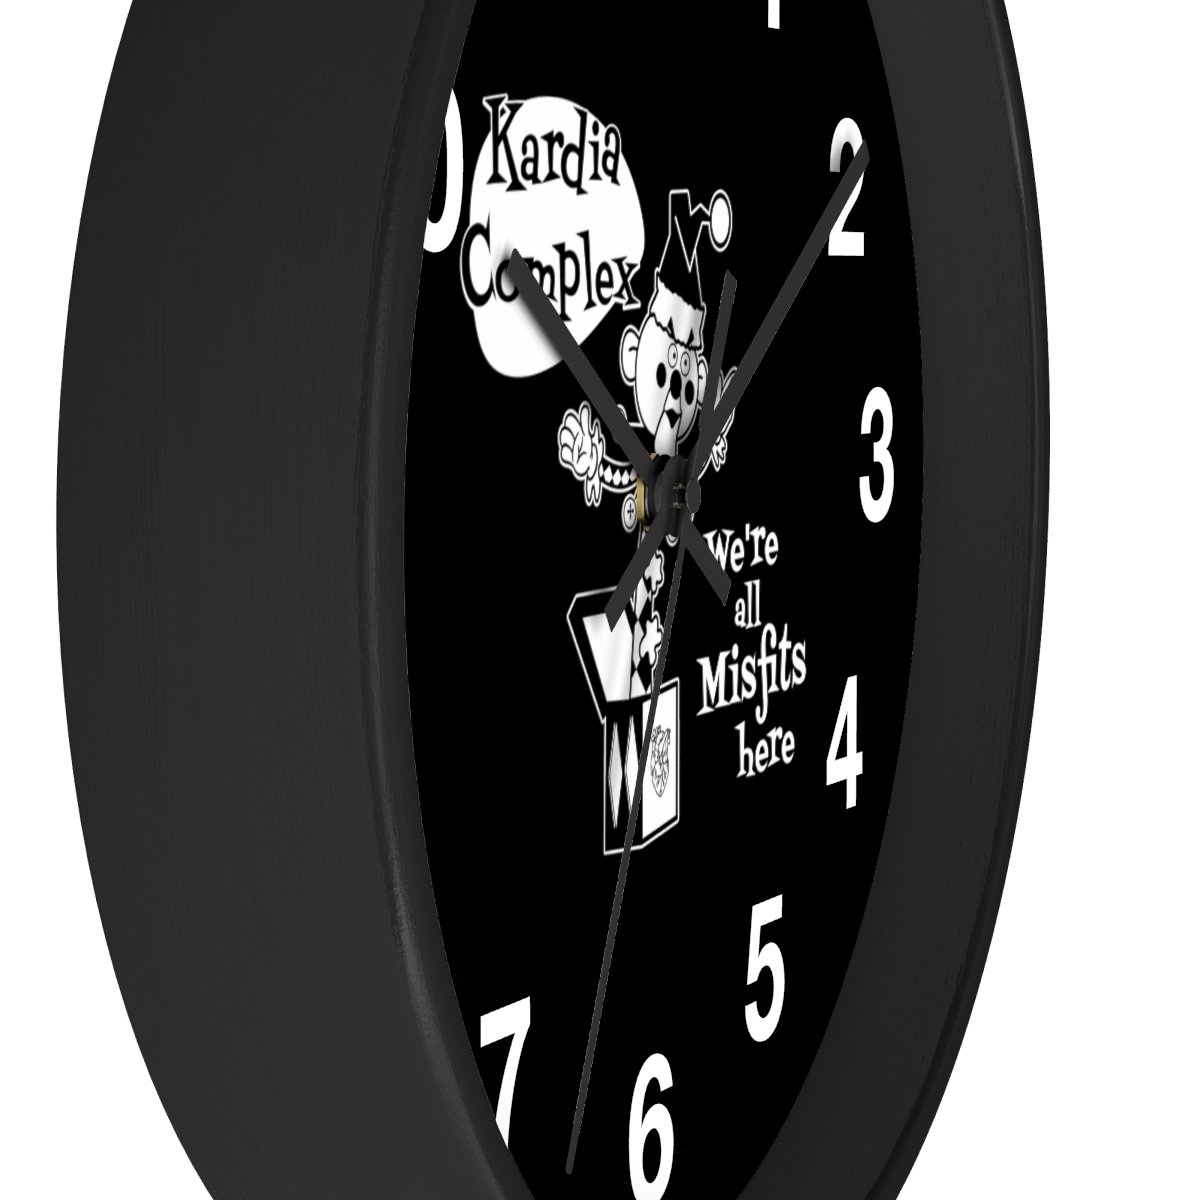 Kardia Complex – We’re All Misfits Here Wall clock